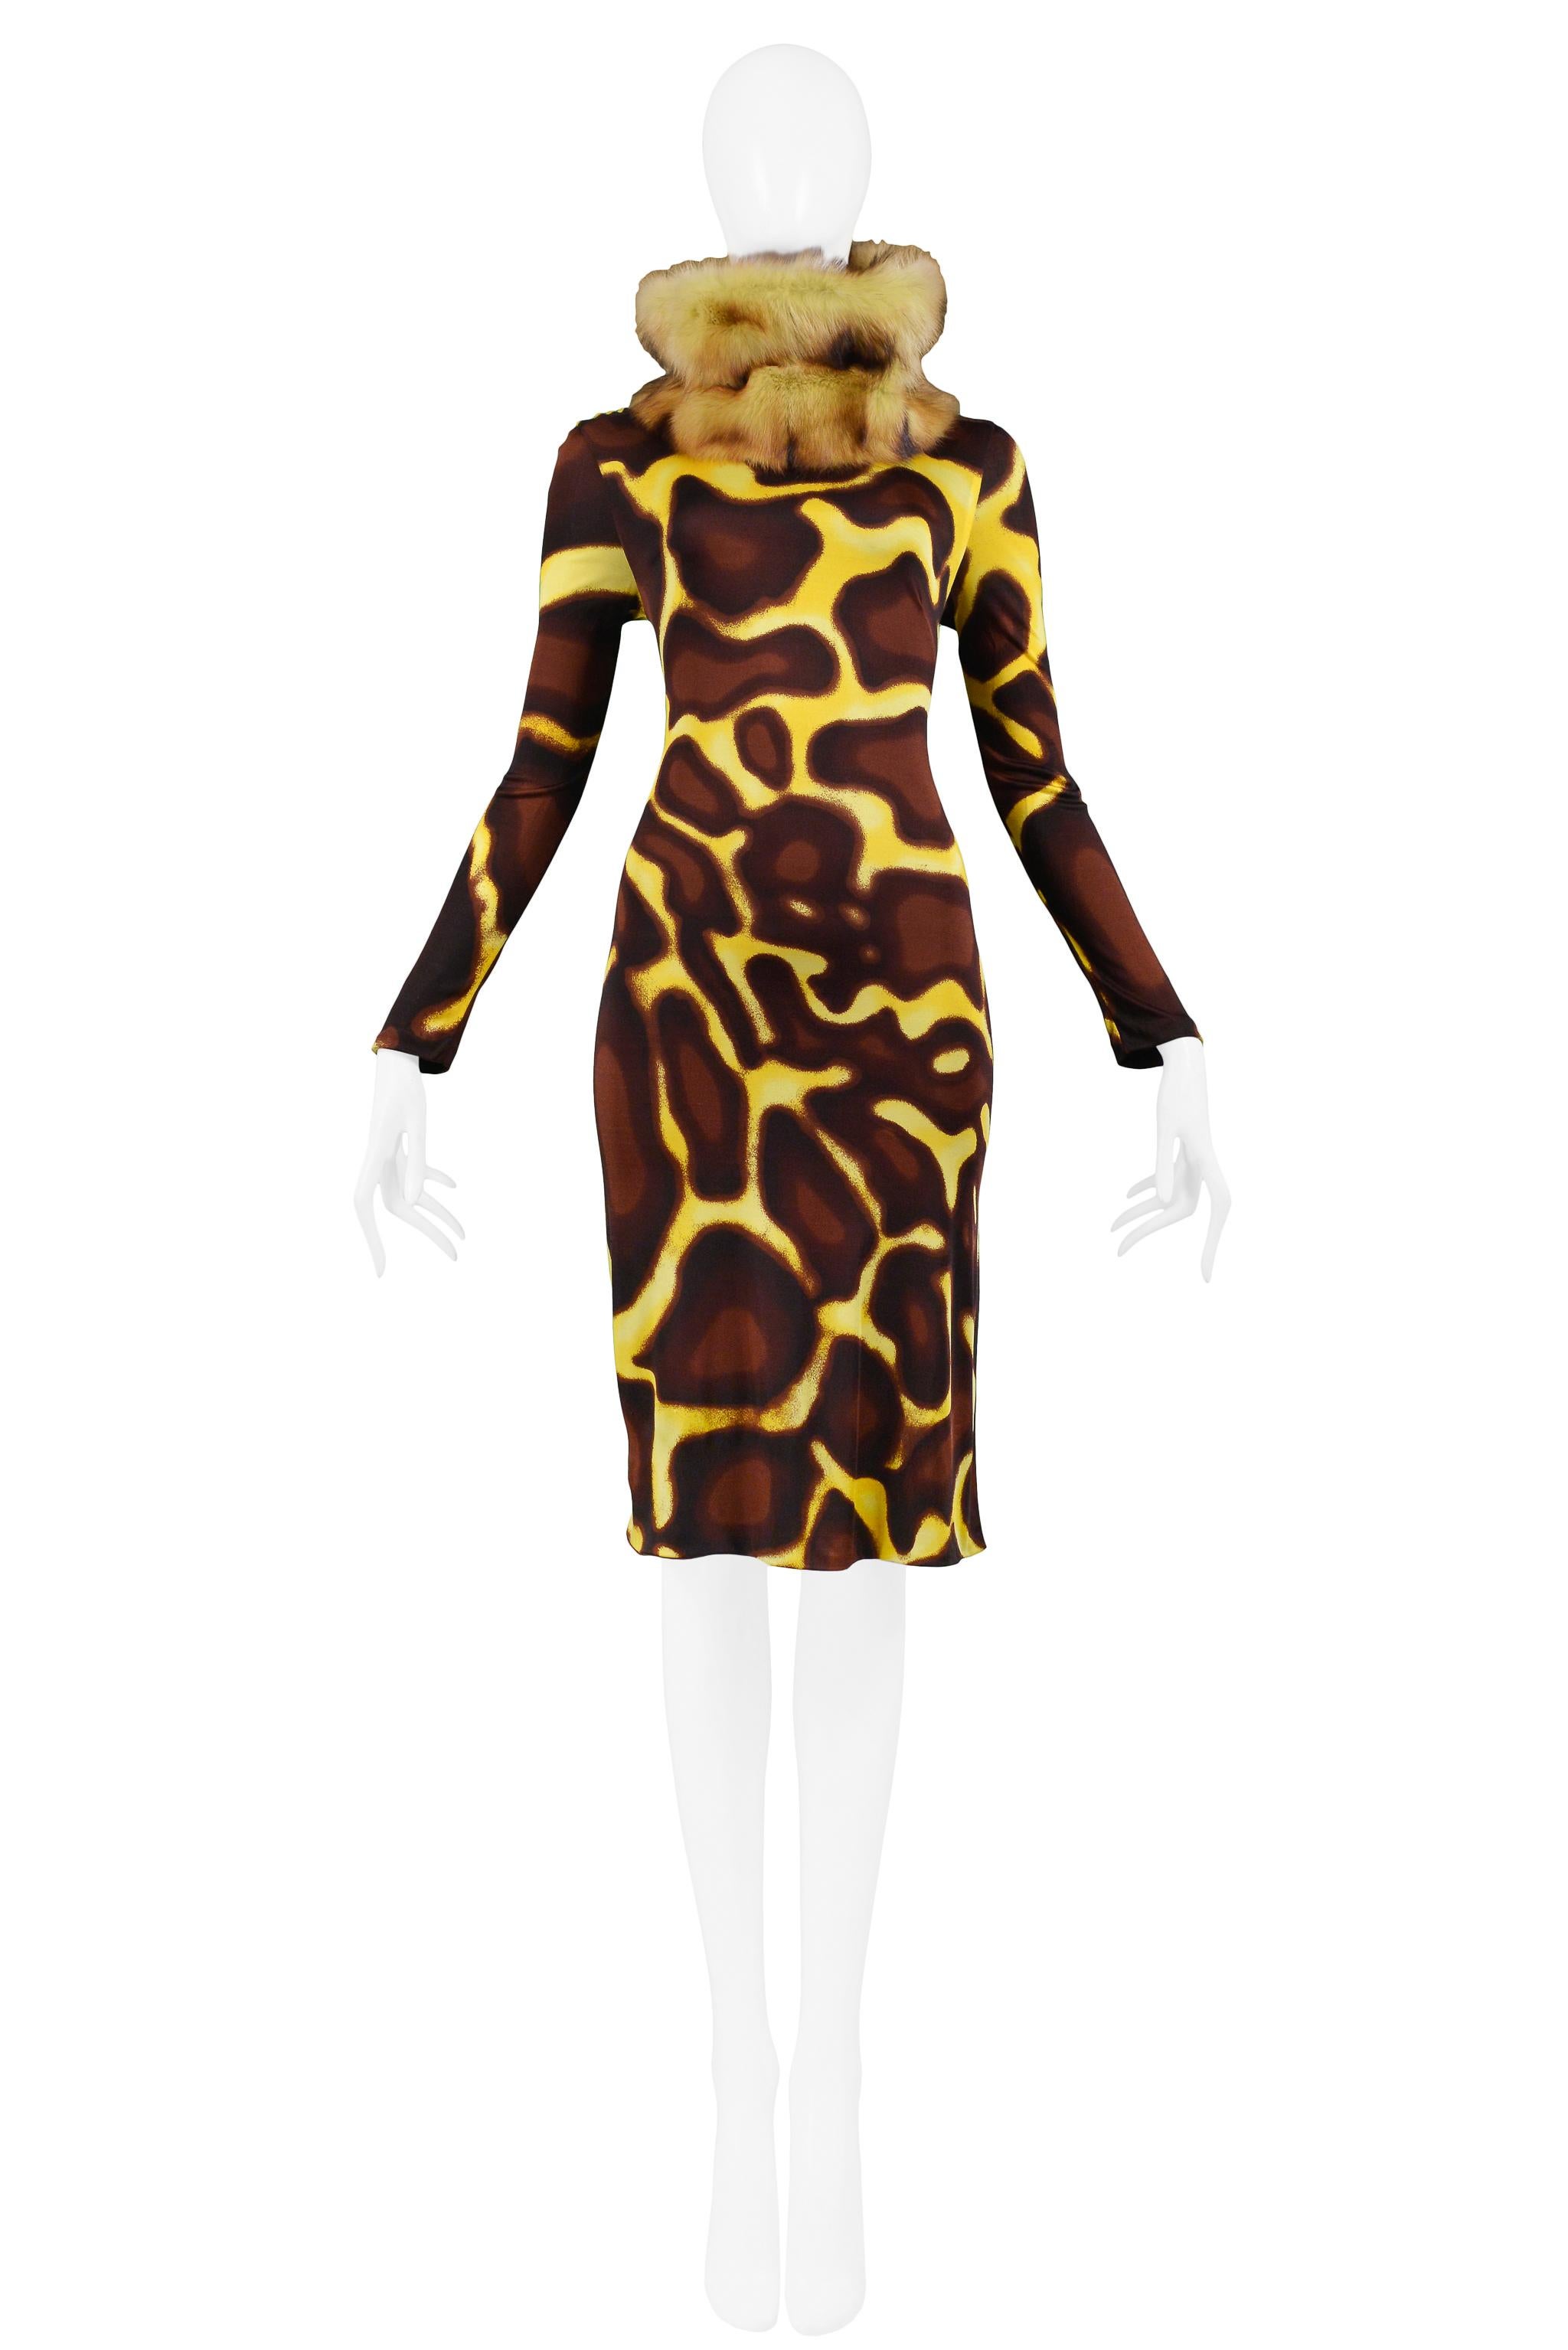 Vintage Versace chestnut brown and banana yellow giraffe print turtleneck long-sleeved dress featuring a removable tan and brown fur collar and center back zipper and gemstone button closure.

Excellent Vintage Condition

Size: 40

Measurements: